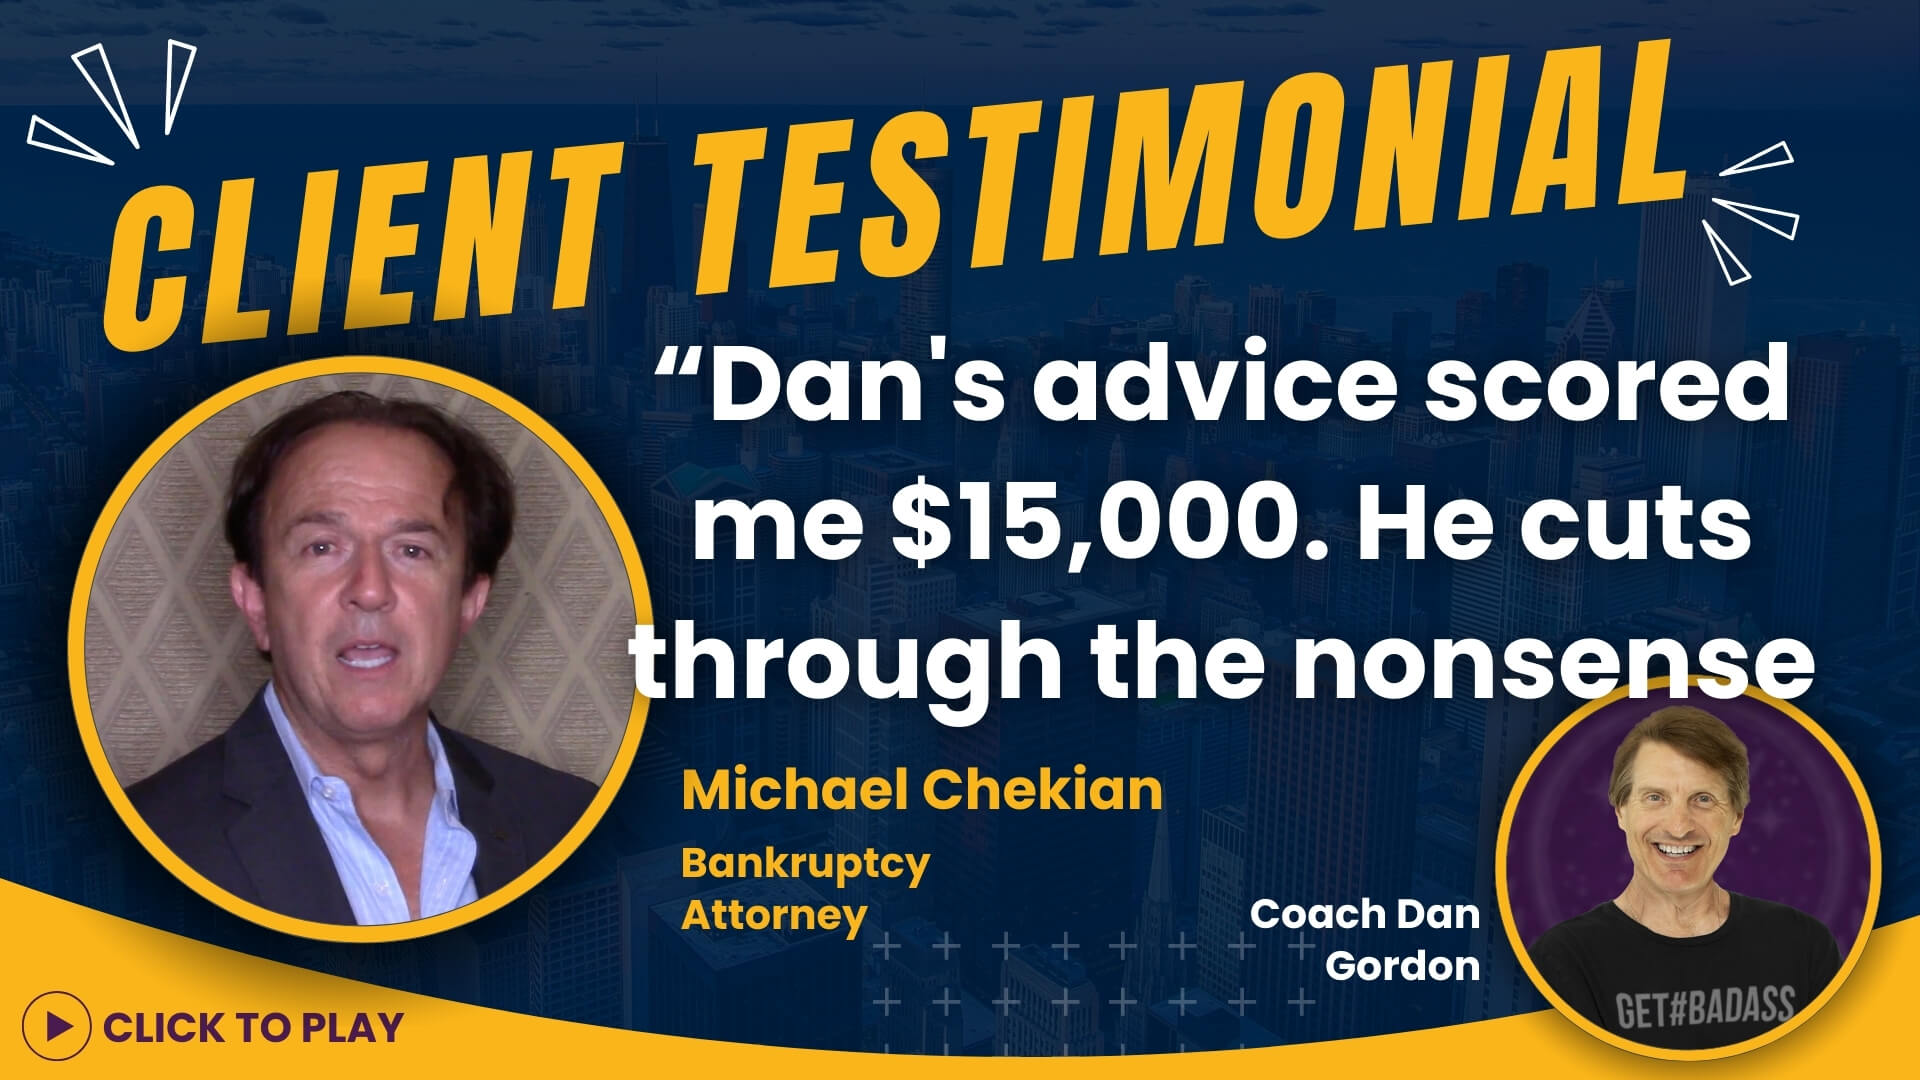 In his testimonial, Michael Chekian, a Bankruptcy Law expert, lauds Coach Dan Gordon's advice for scoring a significant financial win, shown with pleased portraits and a prompt to play the video.